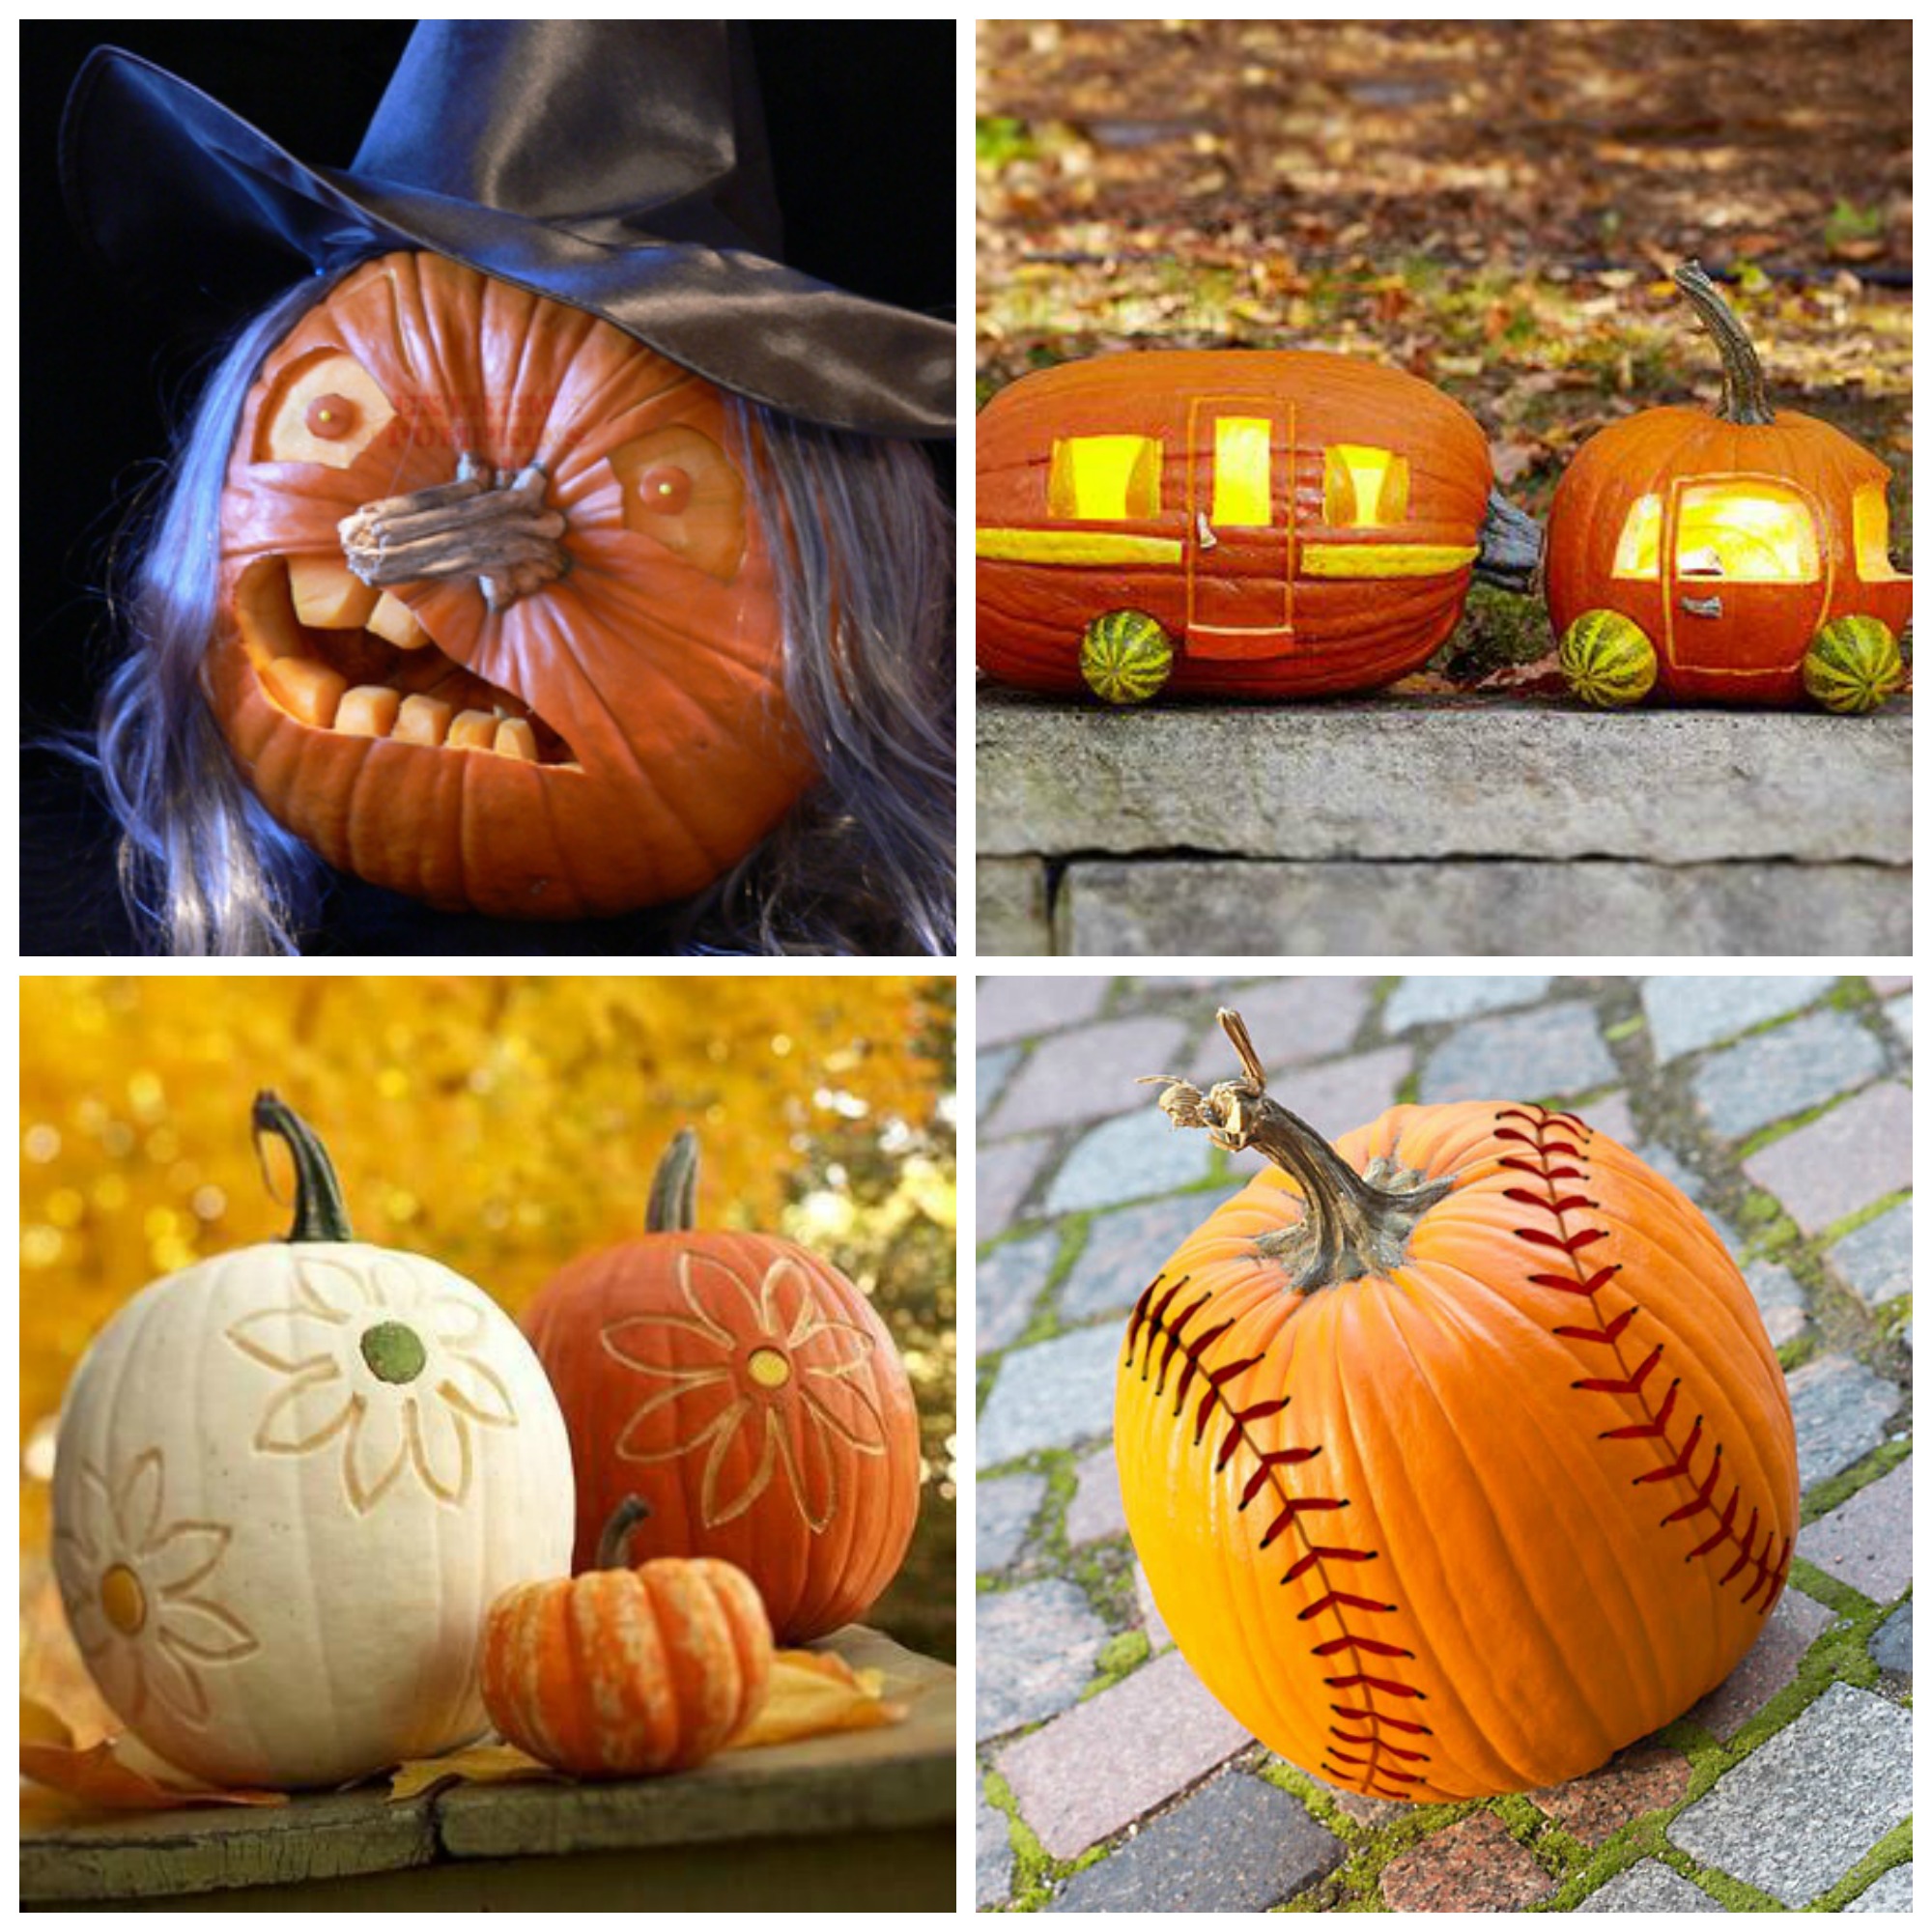 Pumpkin Decorating Ideas and My Curated Pumpkin Roundup - H20Bungalow